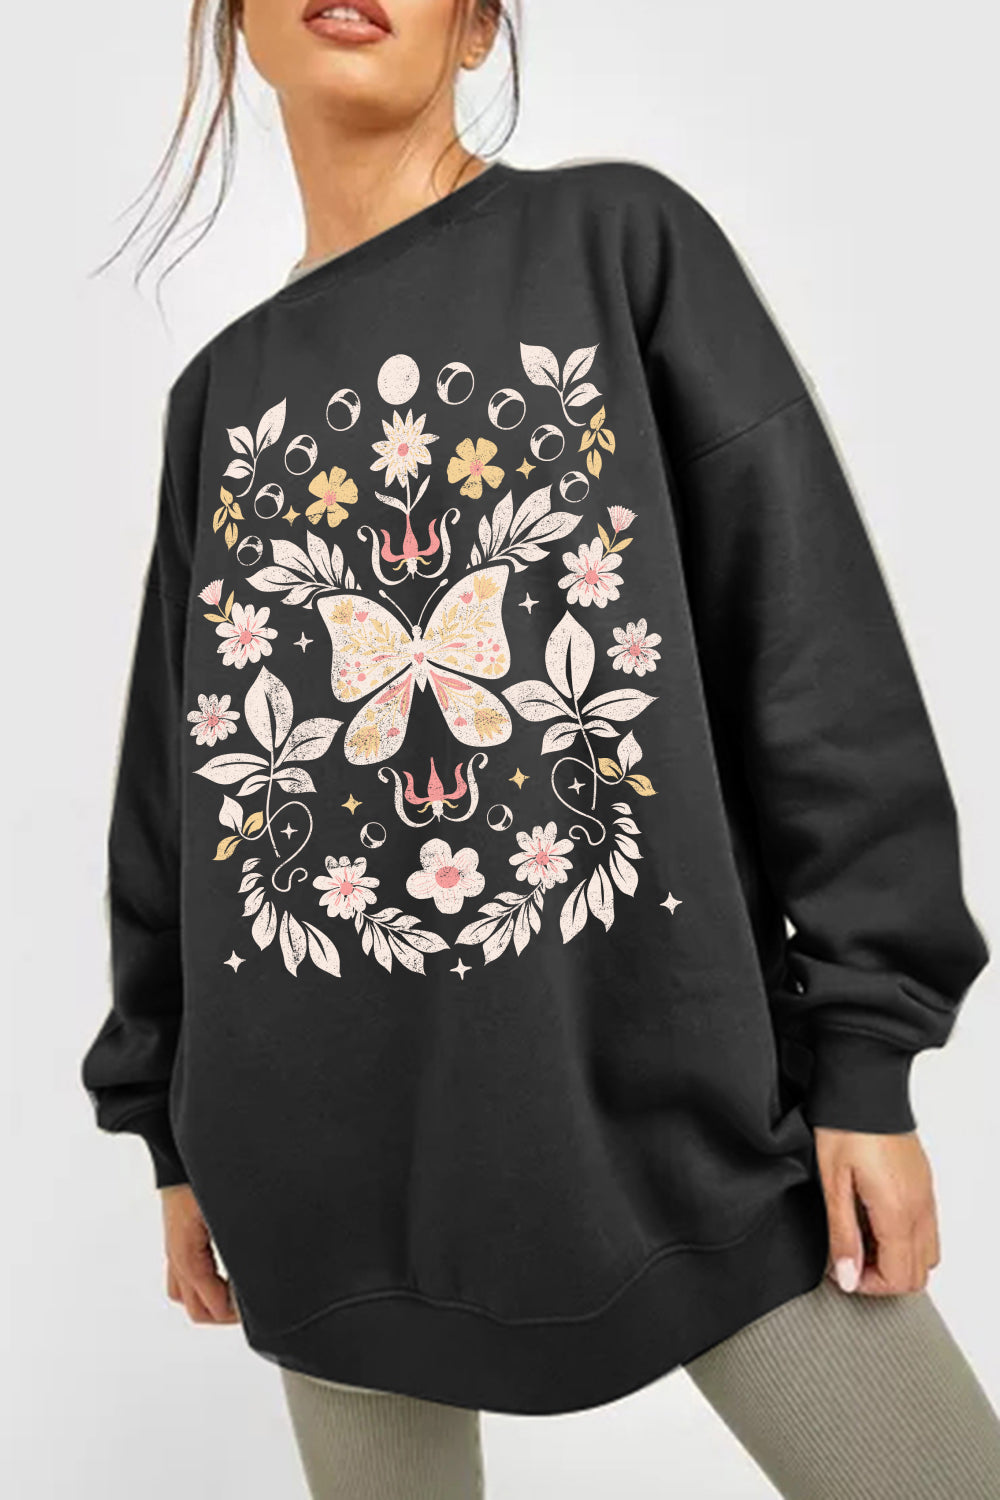 Simply Love Simply Love Full Size Flower and Butterfly Graphic Sweatshirt